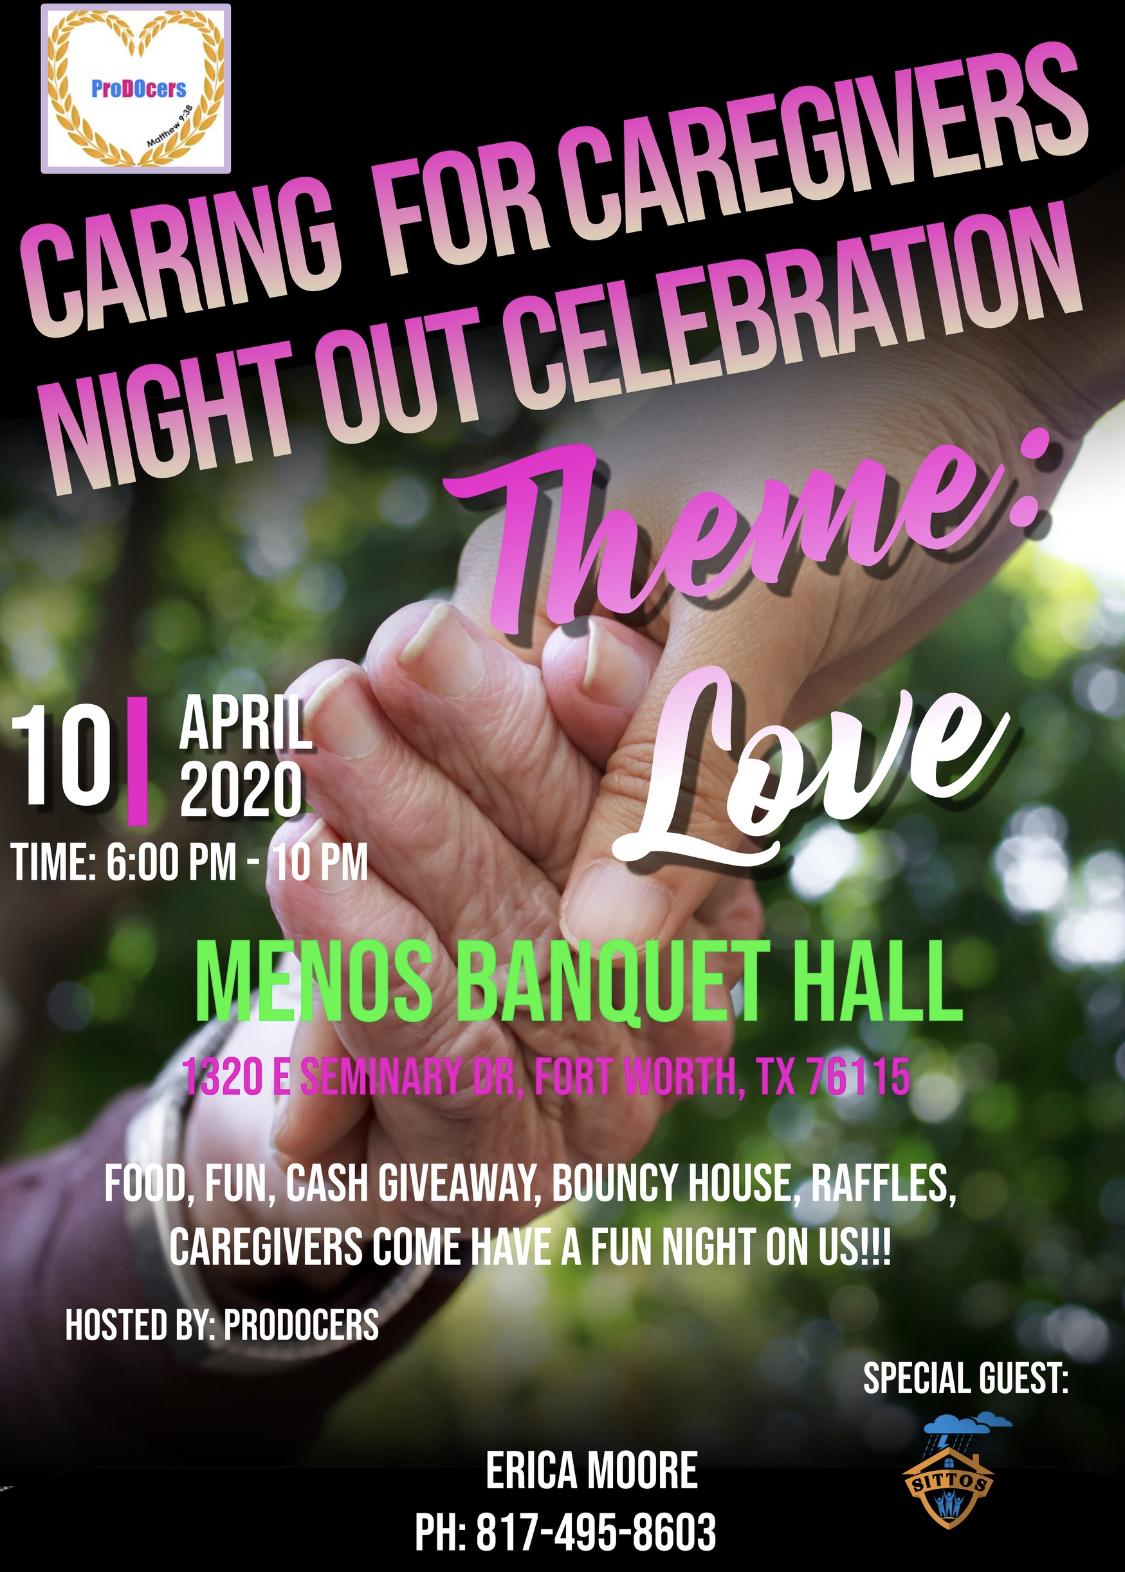 Caring for Caregivers Night Out Celebration